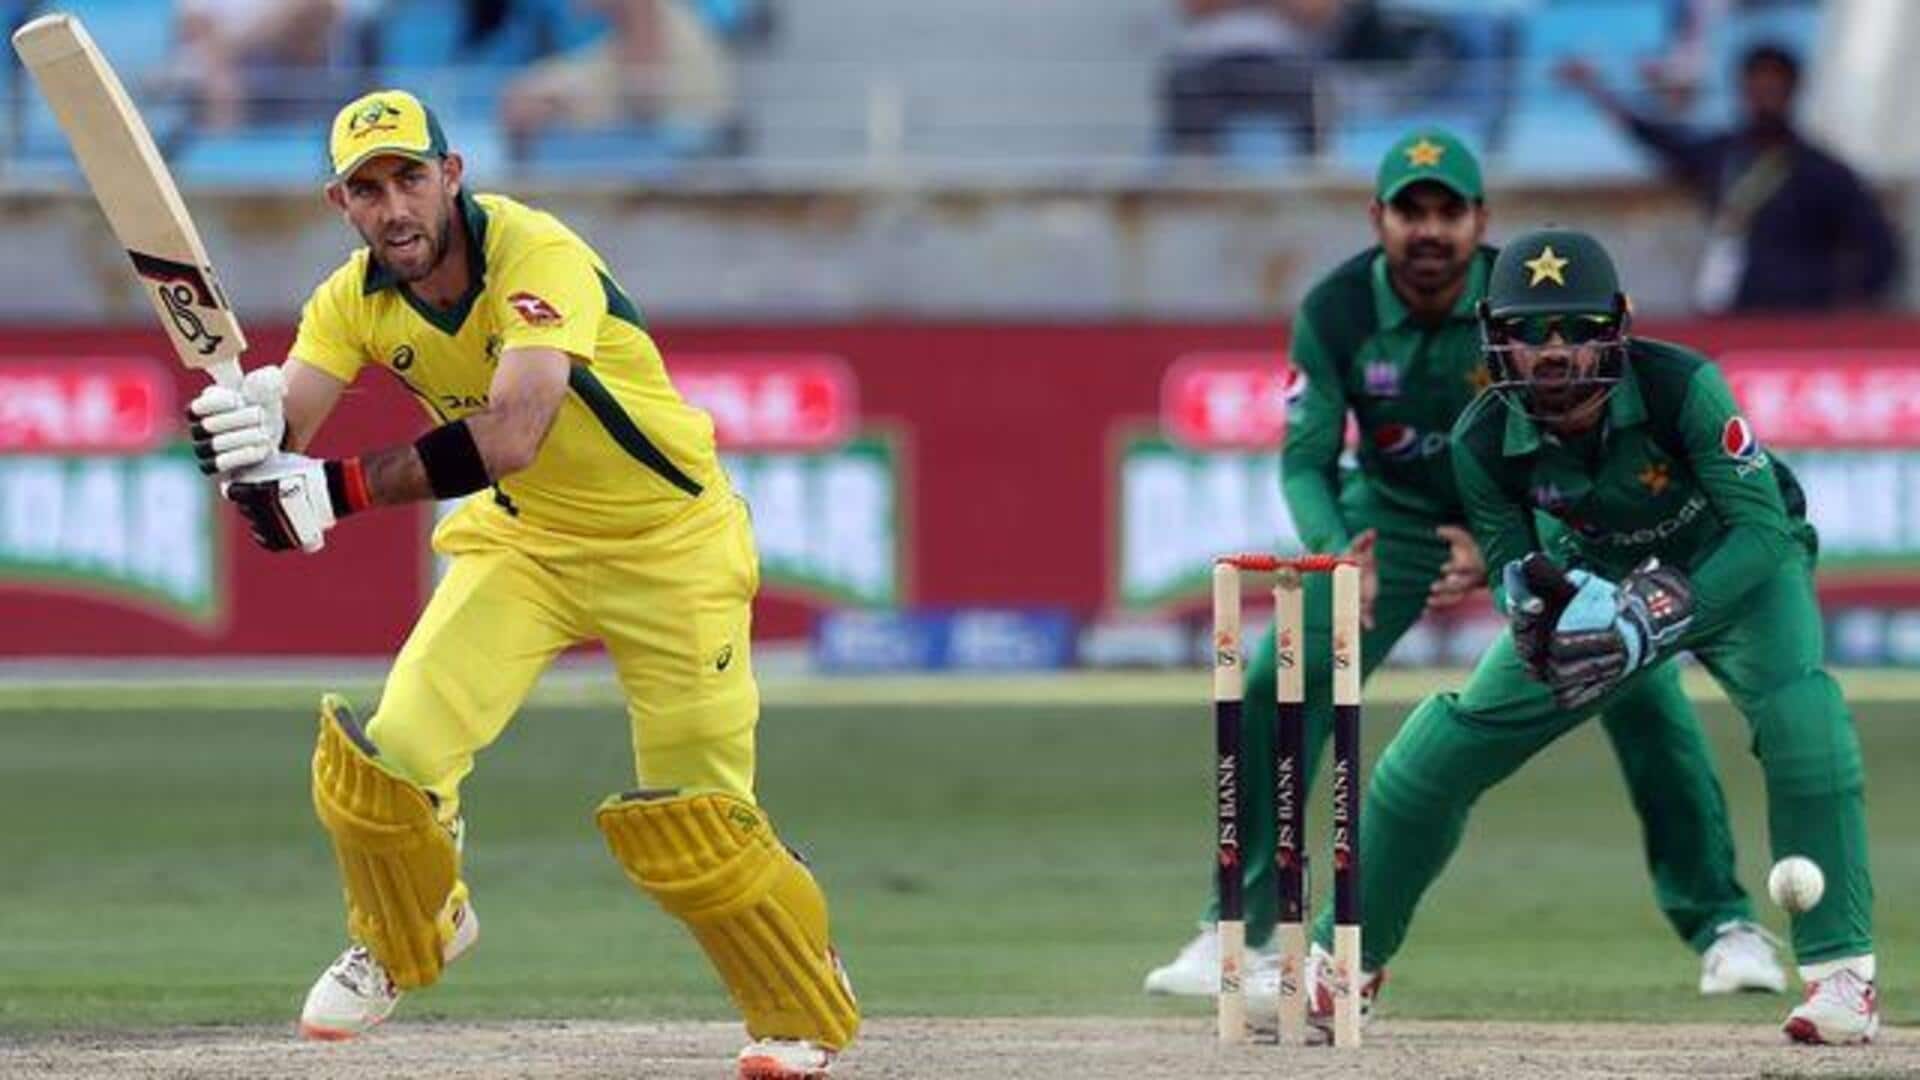 Revisiting iconic World Cup matches between Pakistan and Australia